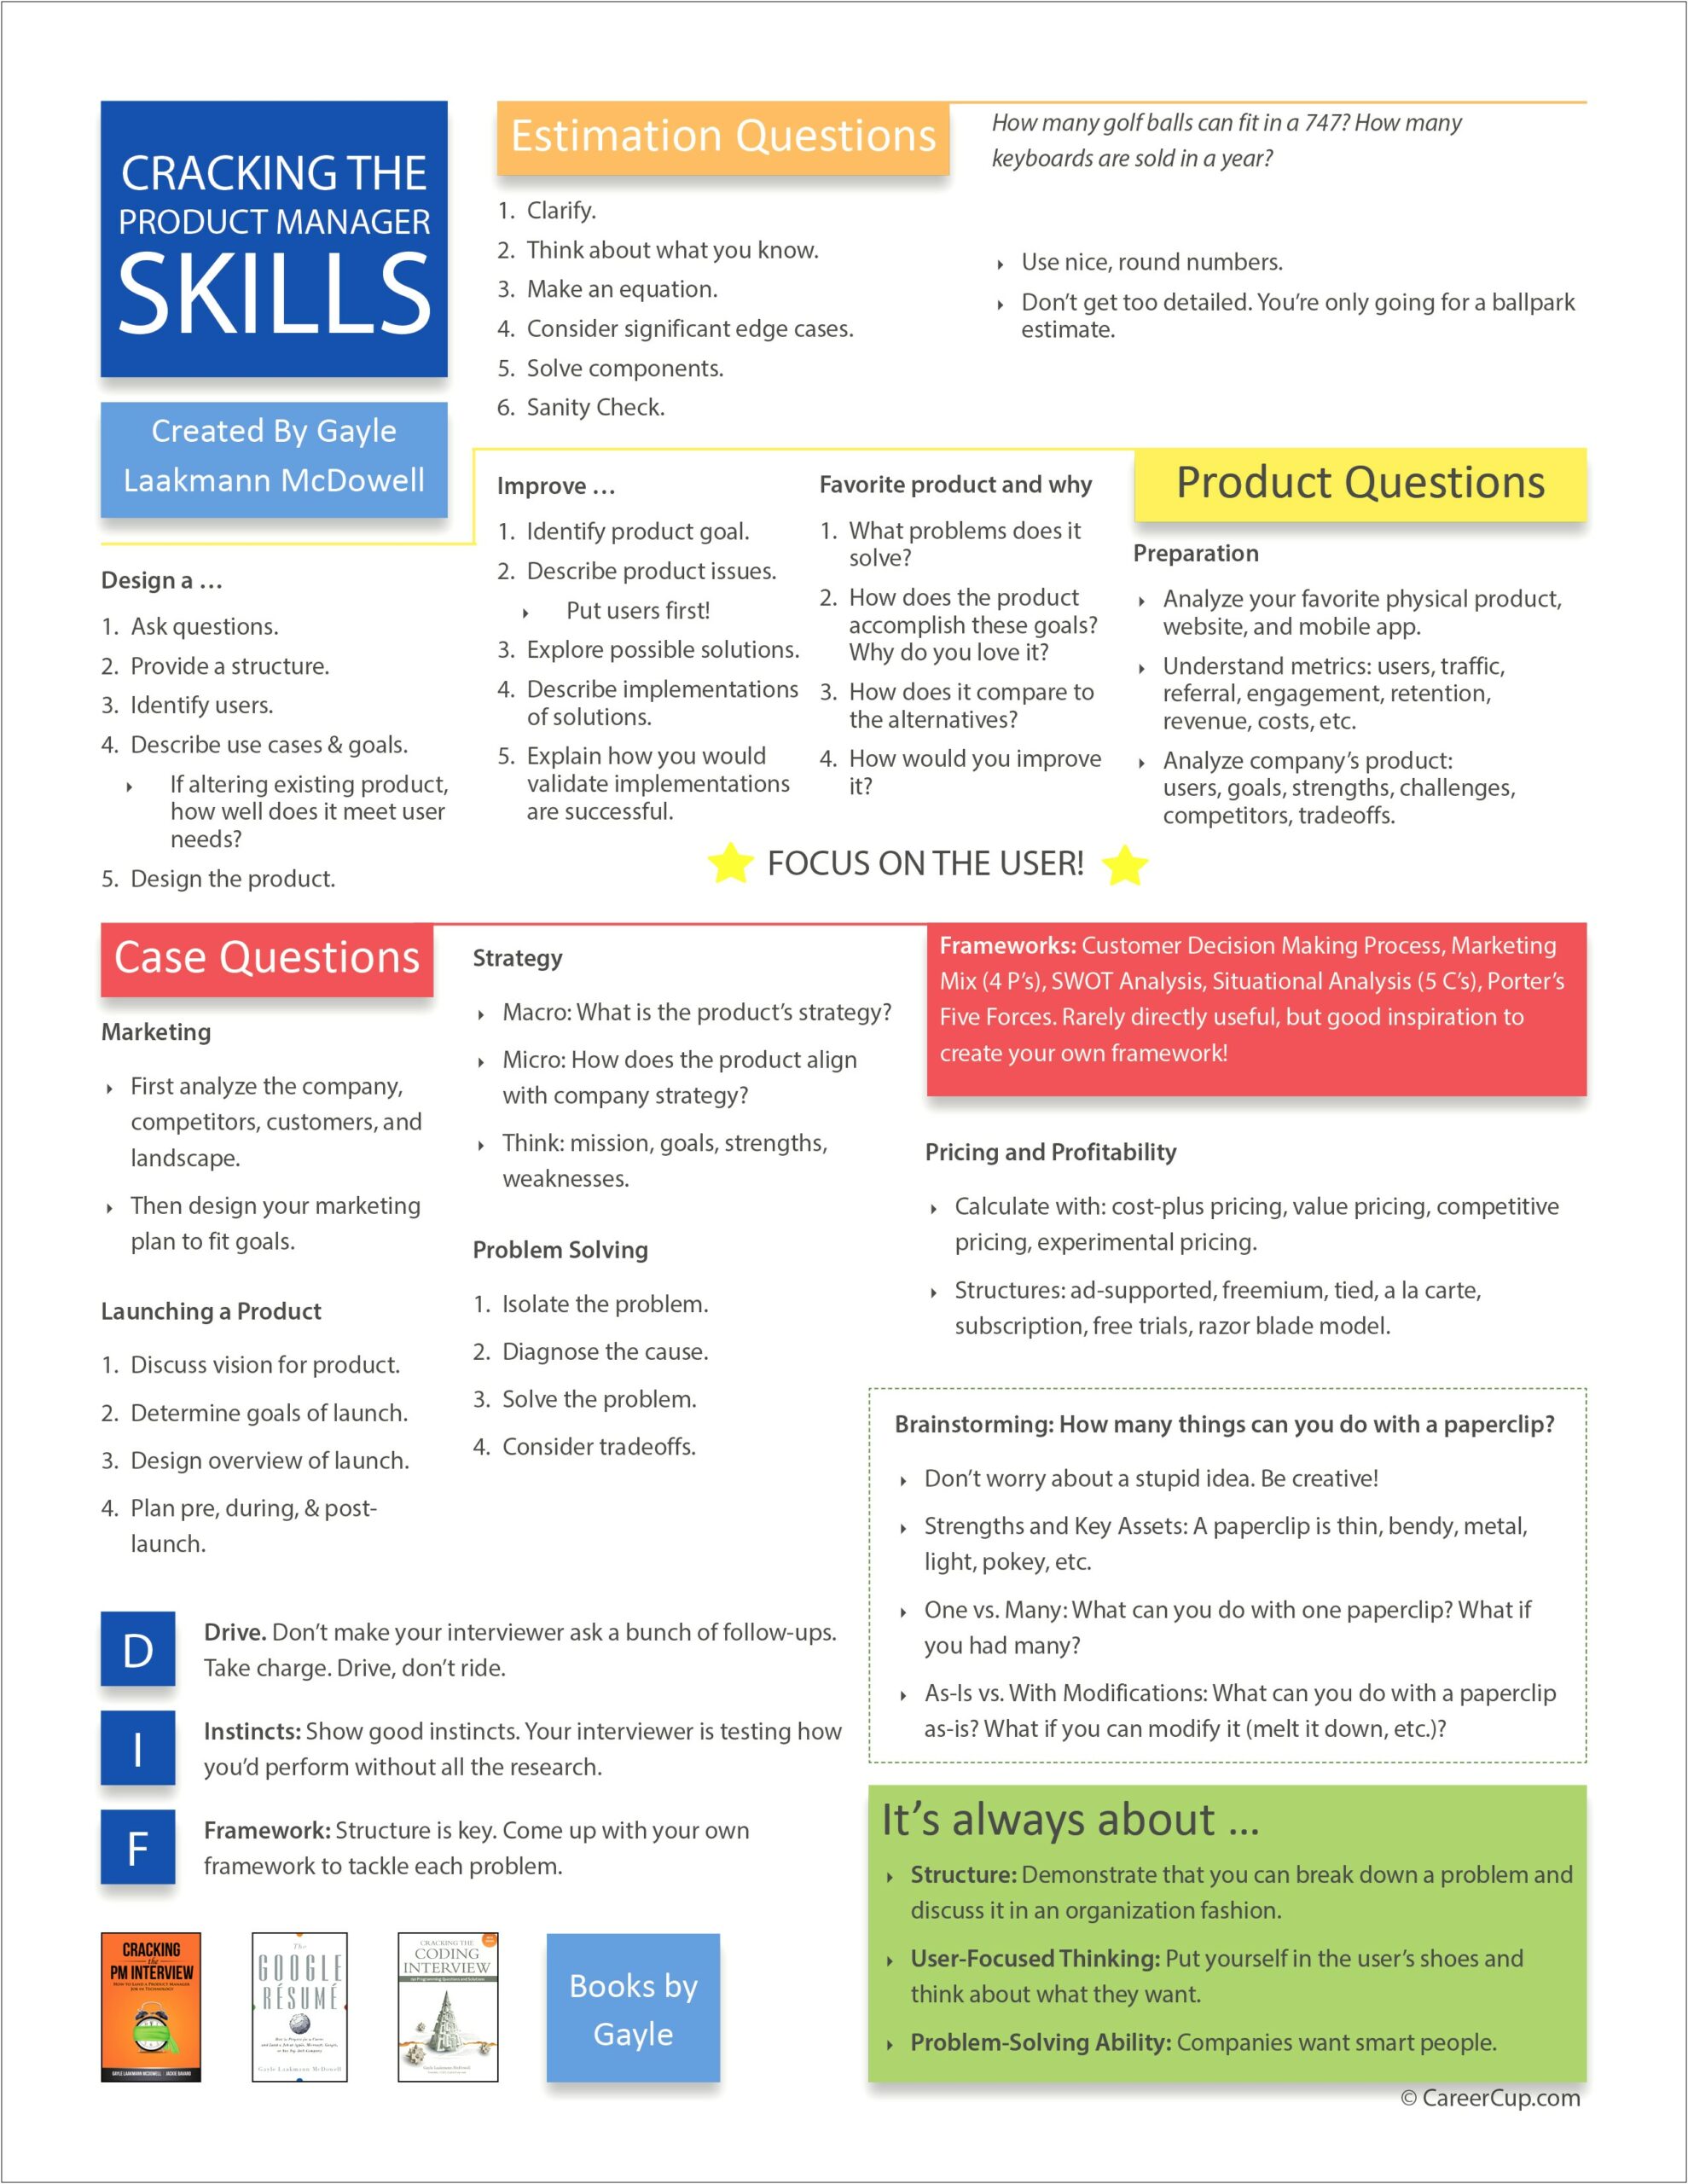 Product Manager Skills Section Of Resume